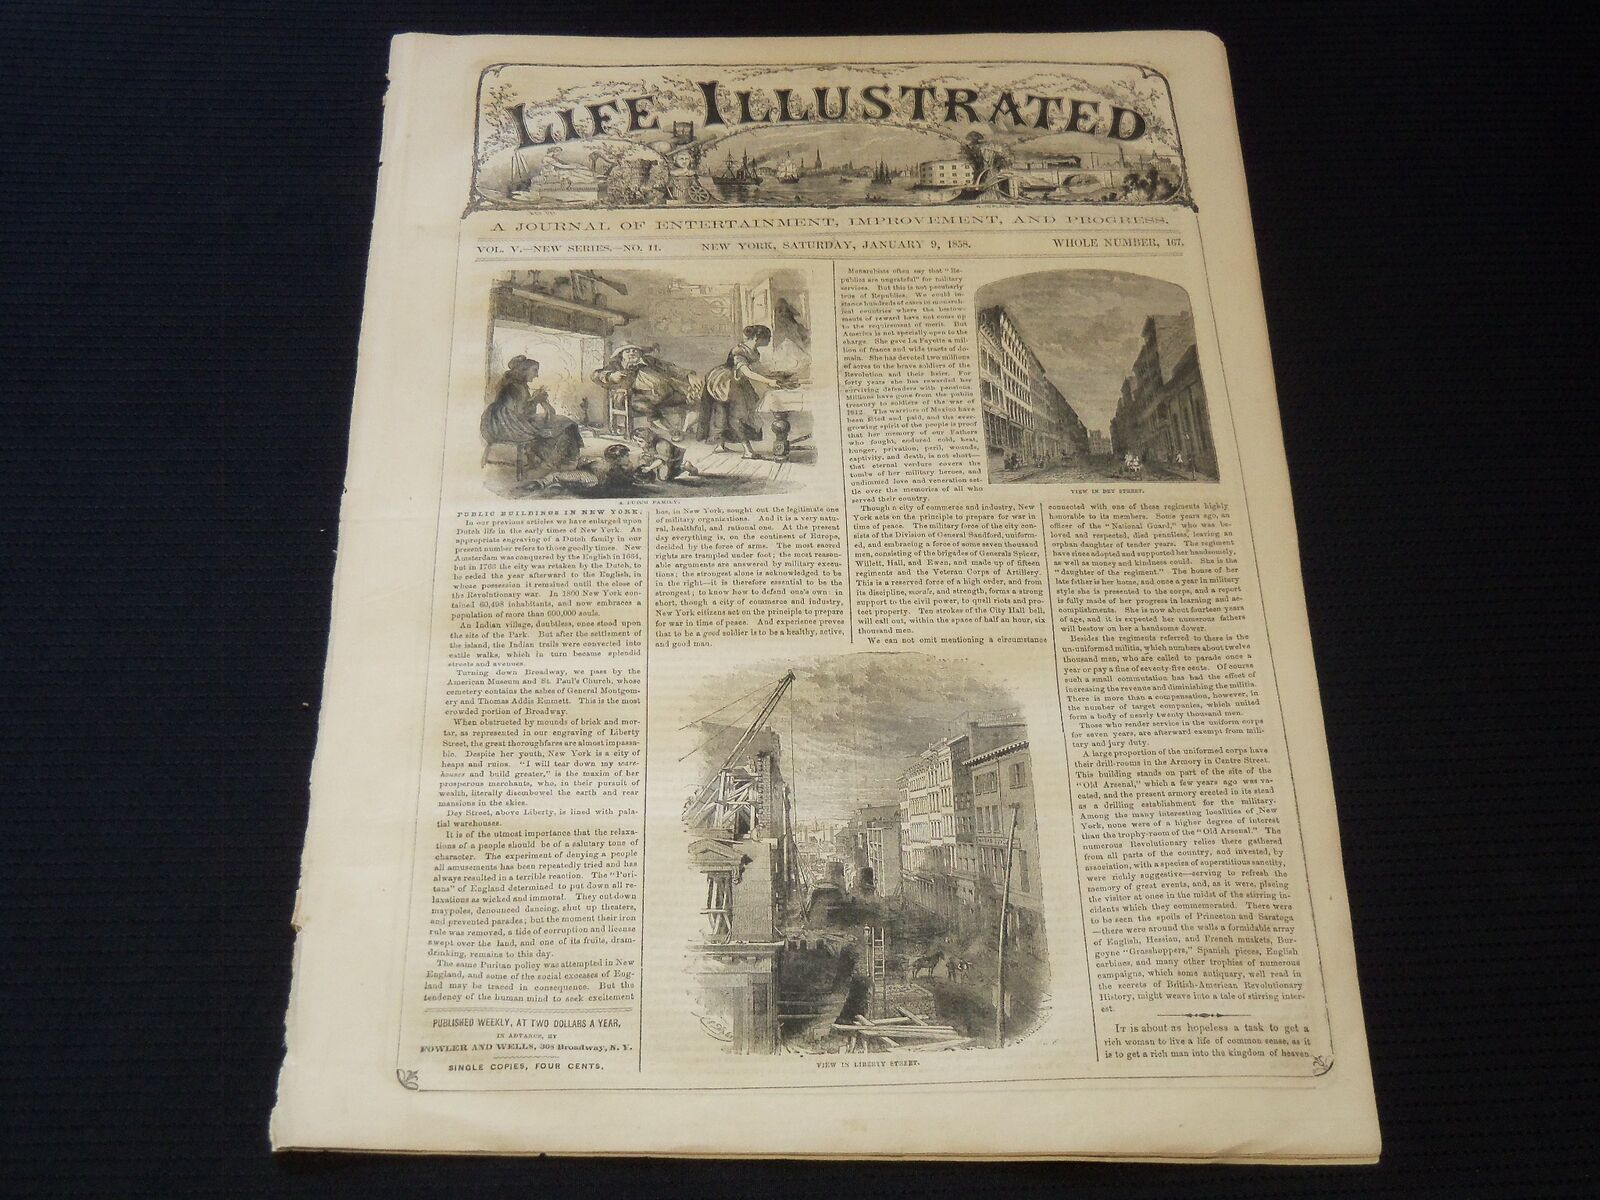 1858 JANUARY 9 LIFE ILLUSTRATED NEWSPAPER - NEW YORK PUBLIC BUILDINGS - NP 5903